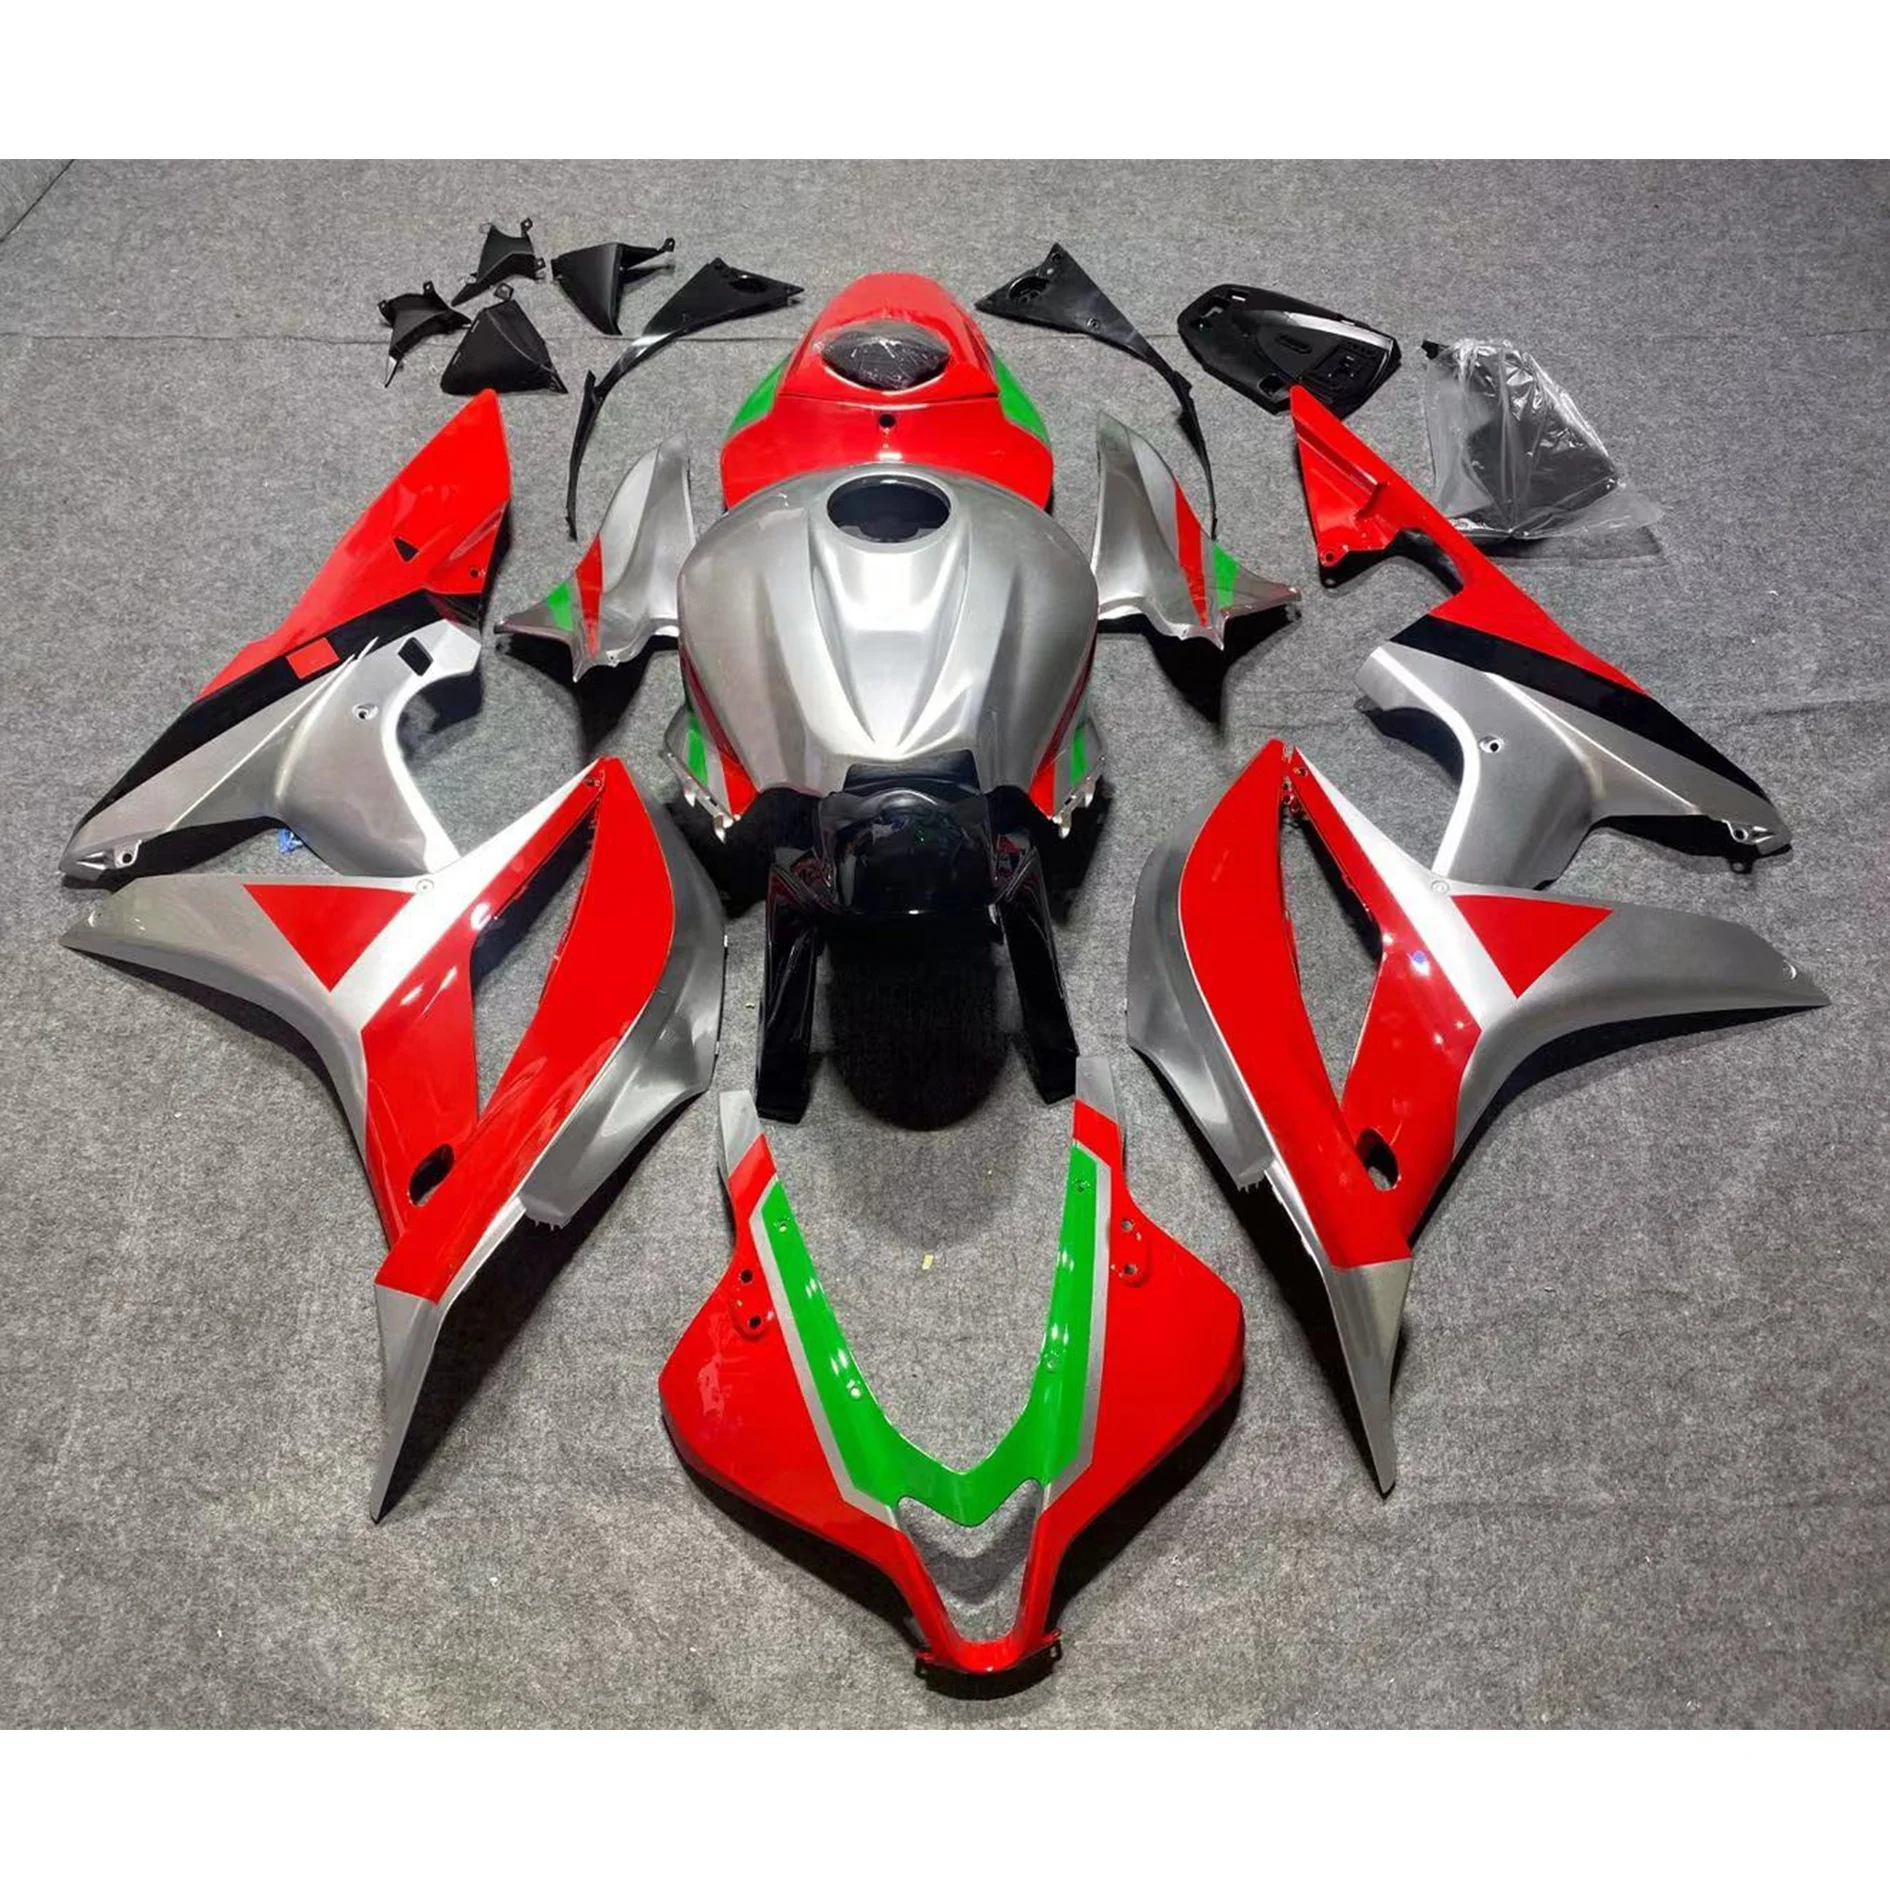 

2022 WHSC Silver Green Red OEM Motorcycle Accessories For HONDA CBR600 RR 2007-2008 07 08 Motorcycle Body Systems Fairing Kits, Pictures shown